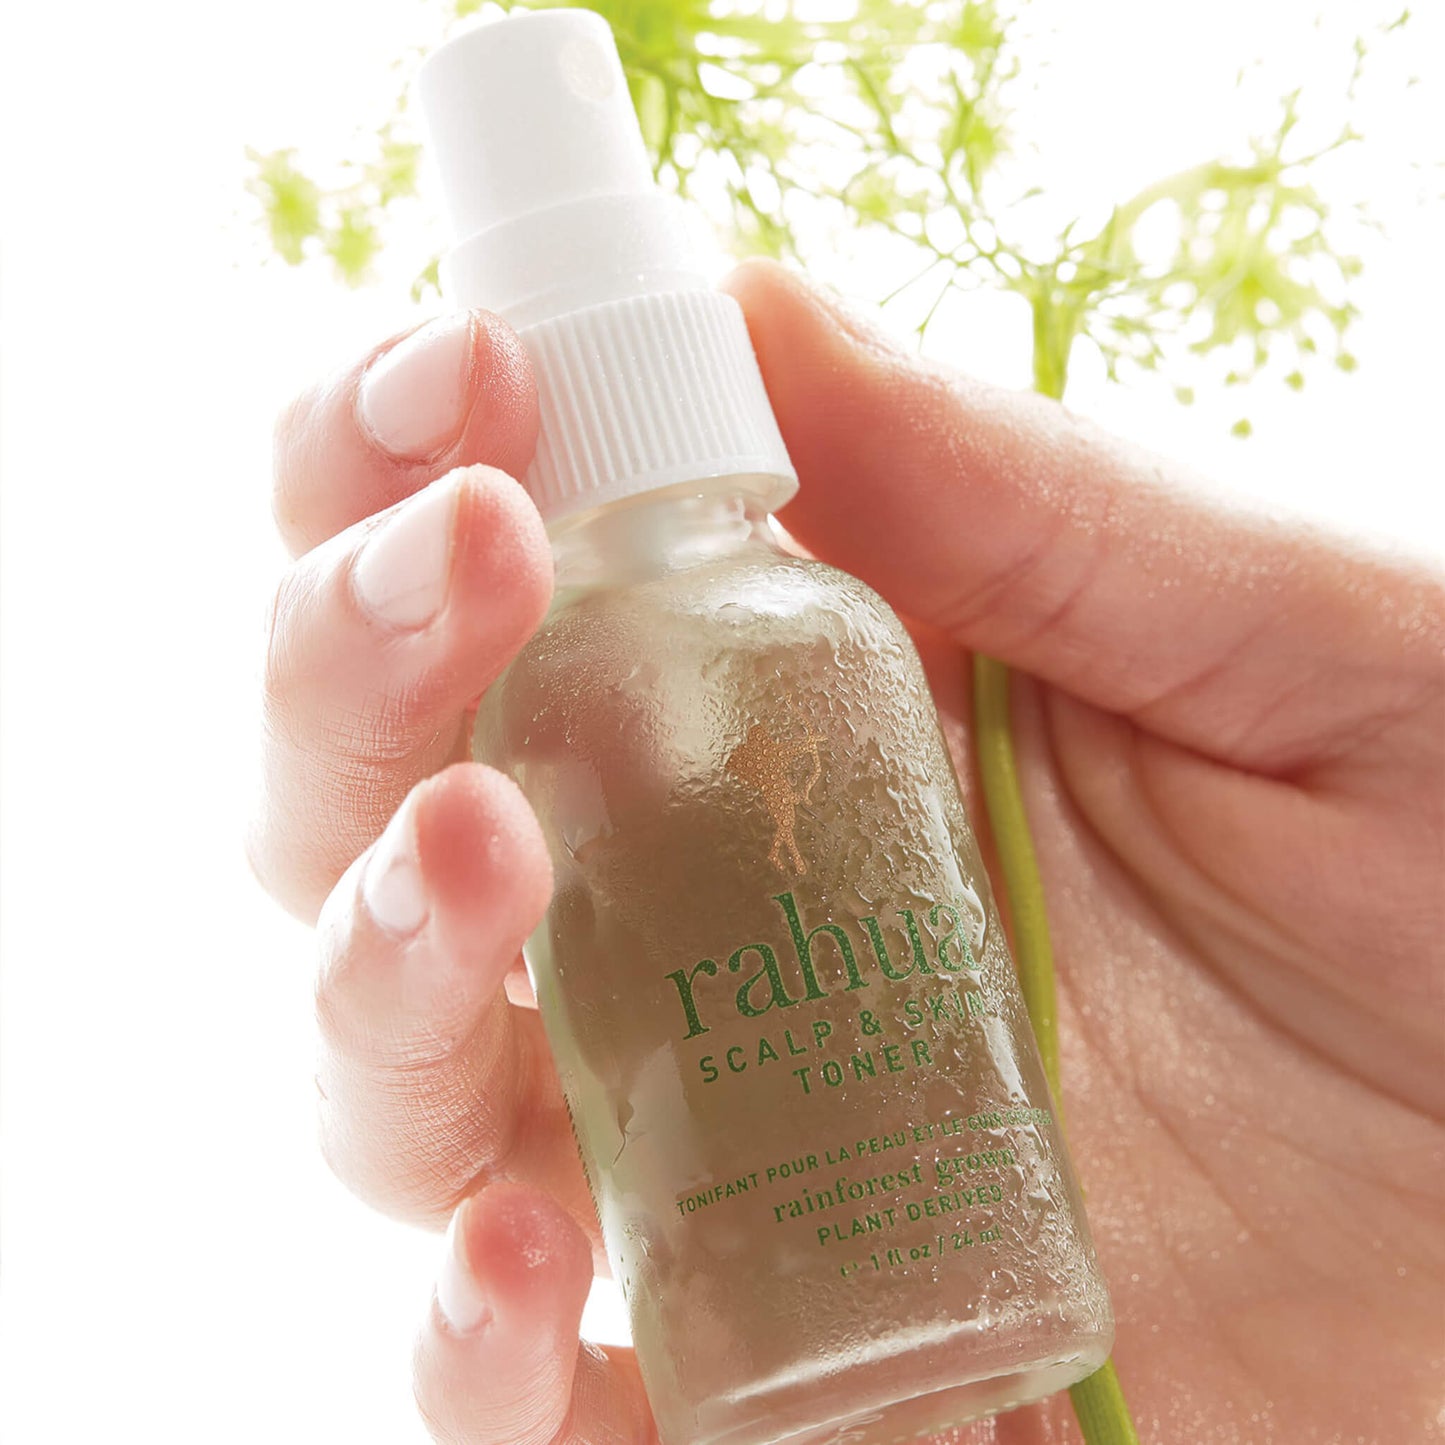 Rahua Scalp and Skin Toner in hand with plant